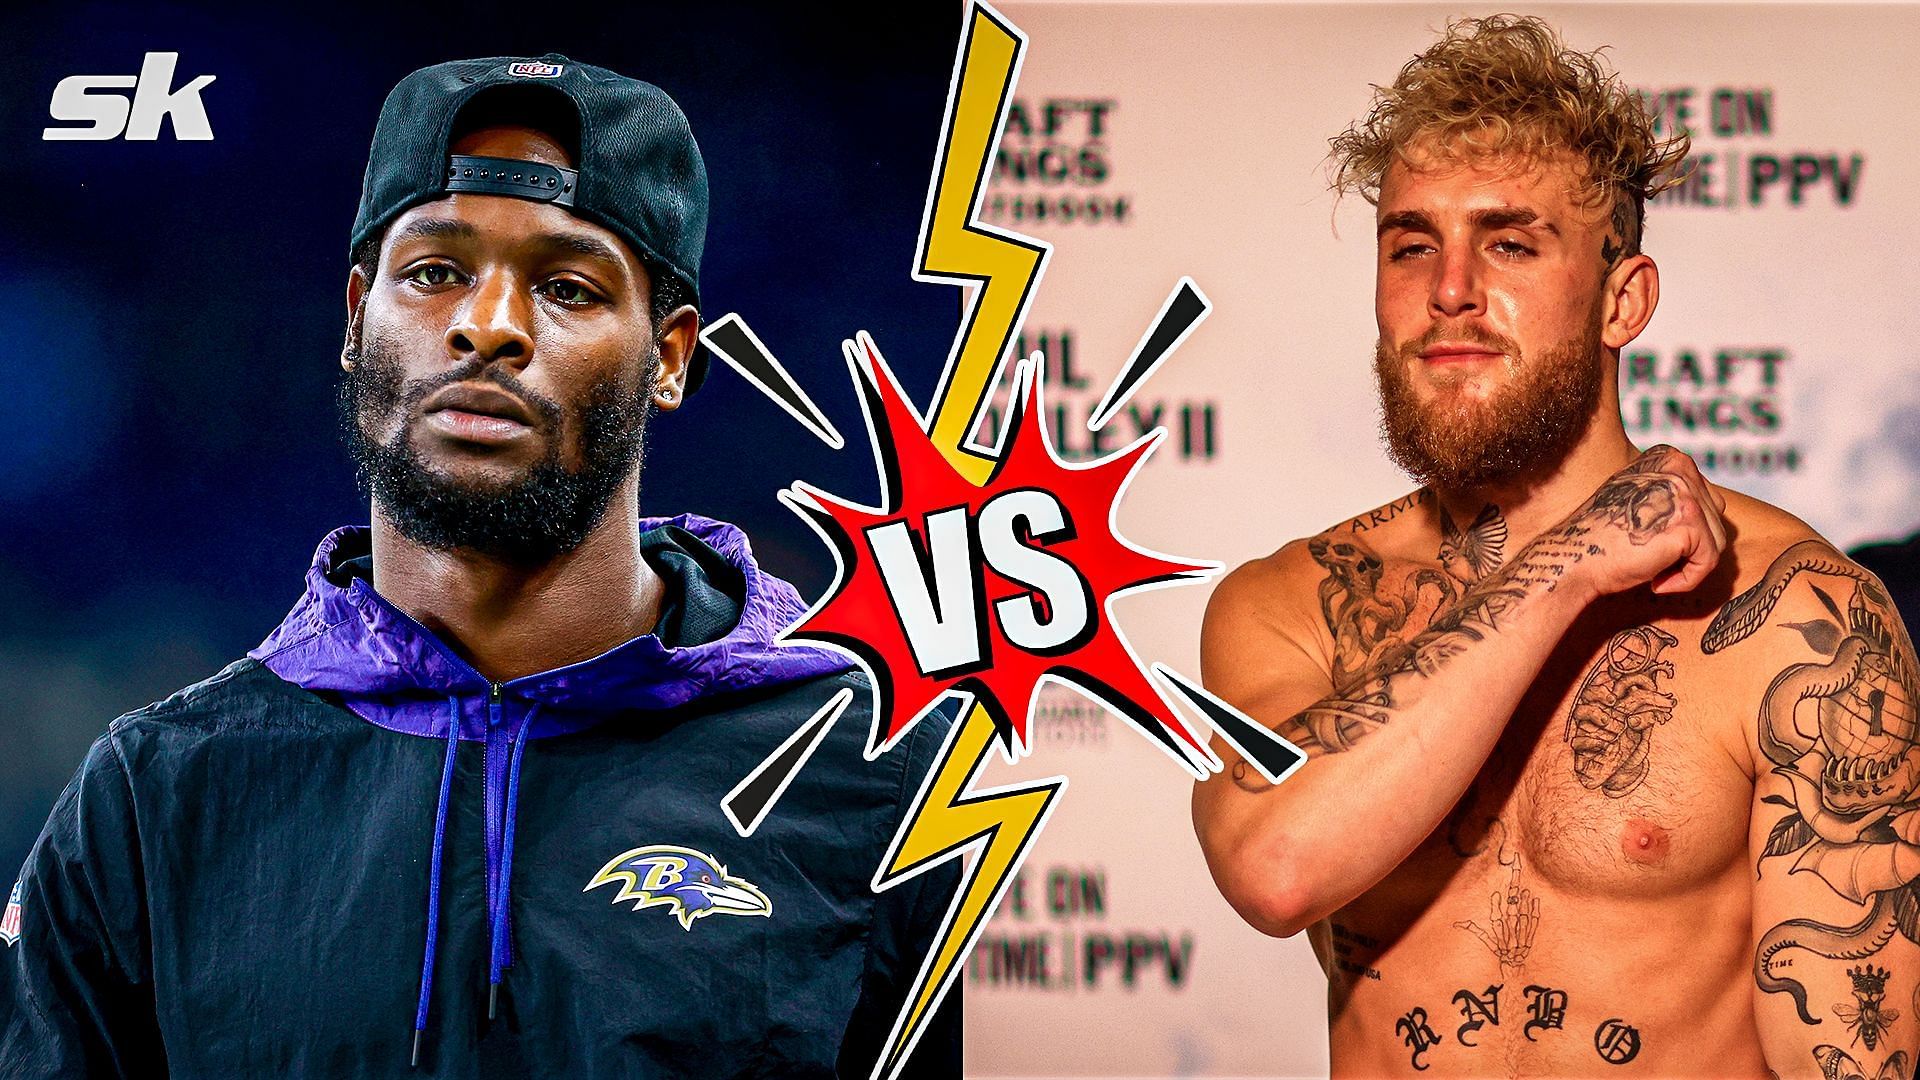 Le&#039;Veon Bell vs. Jake Paul is a fight we could see down the road.